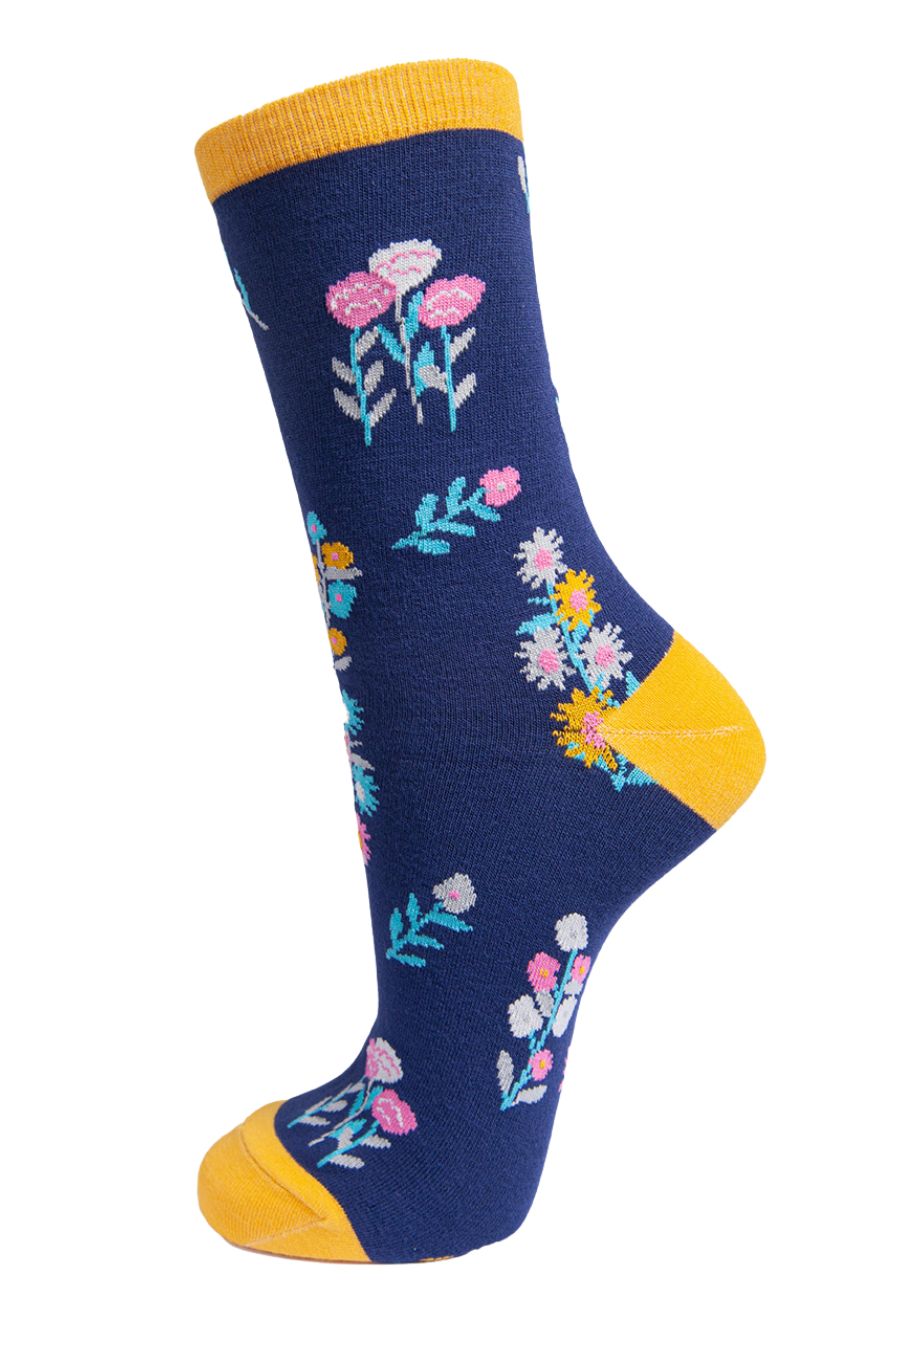 navy blue and yellow floral print ankle socks, all over ditsy floral pattern